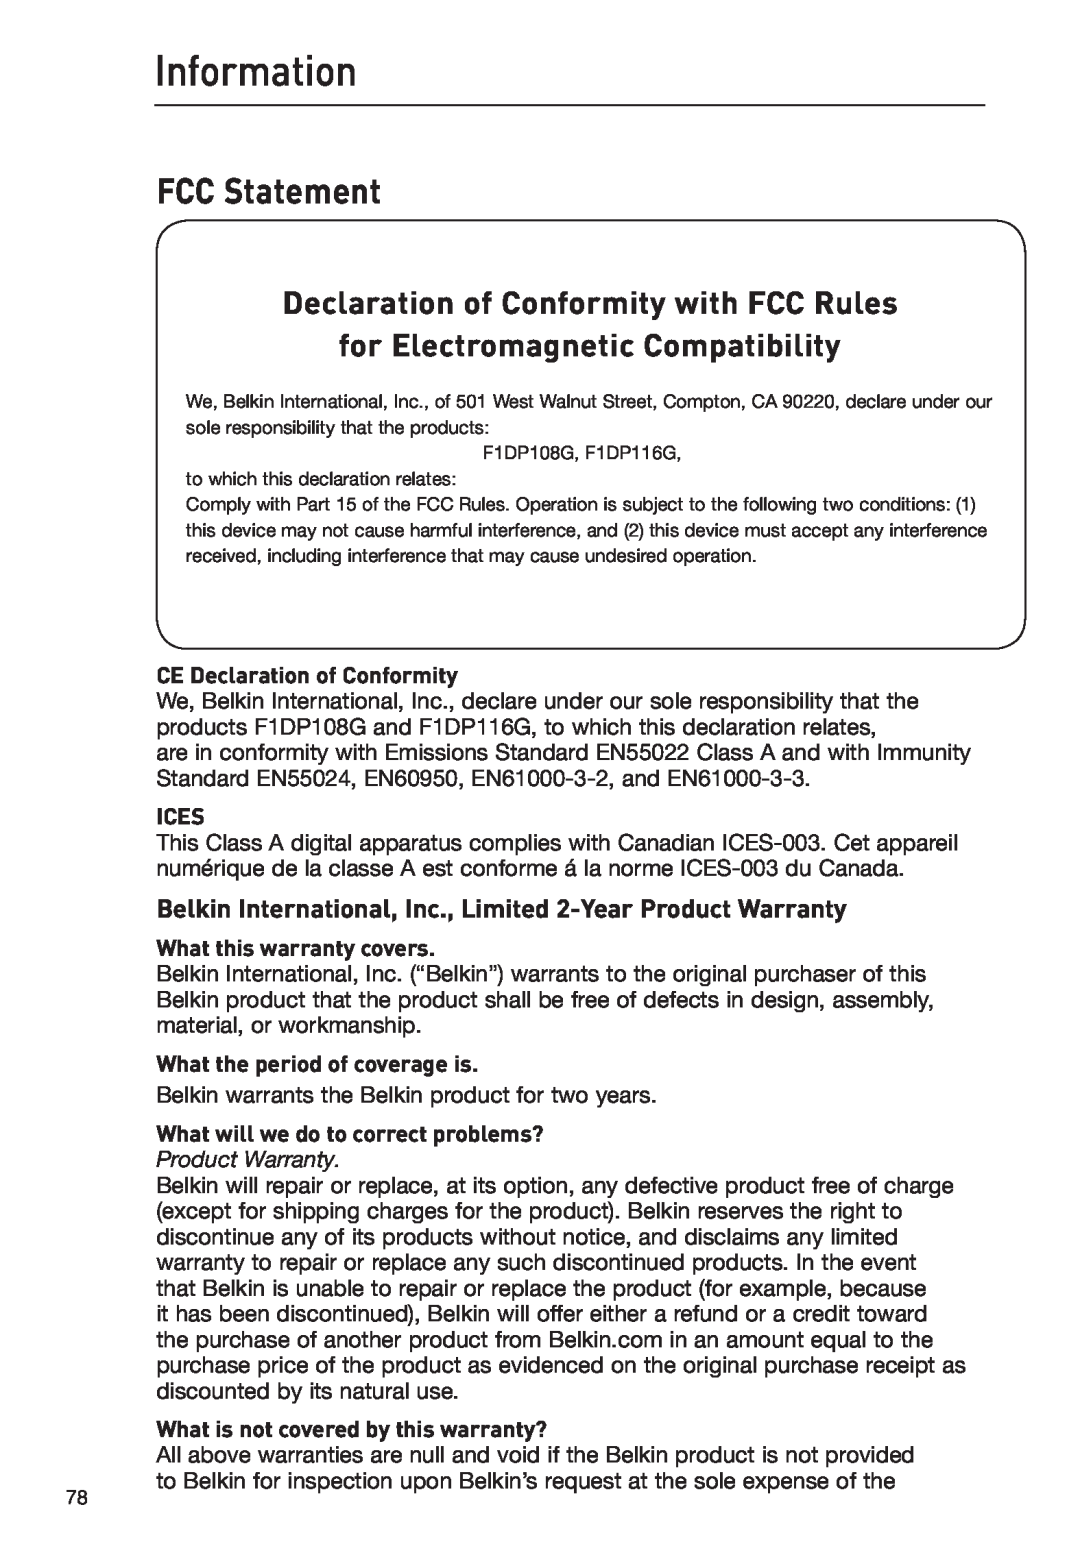 Belkin F1DP108G Information, FCC Statement, Declaration of Conformity with FCC Rules, for Electromagnetic Compatibility 